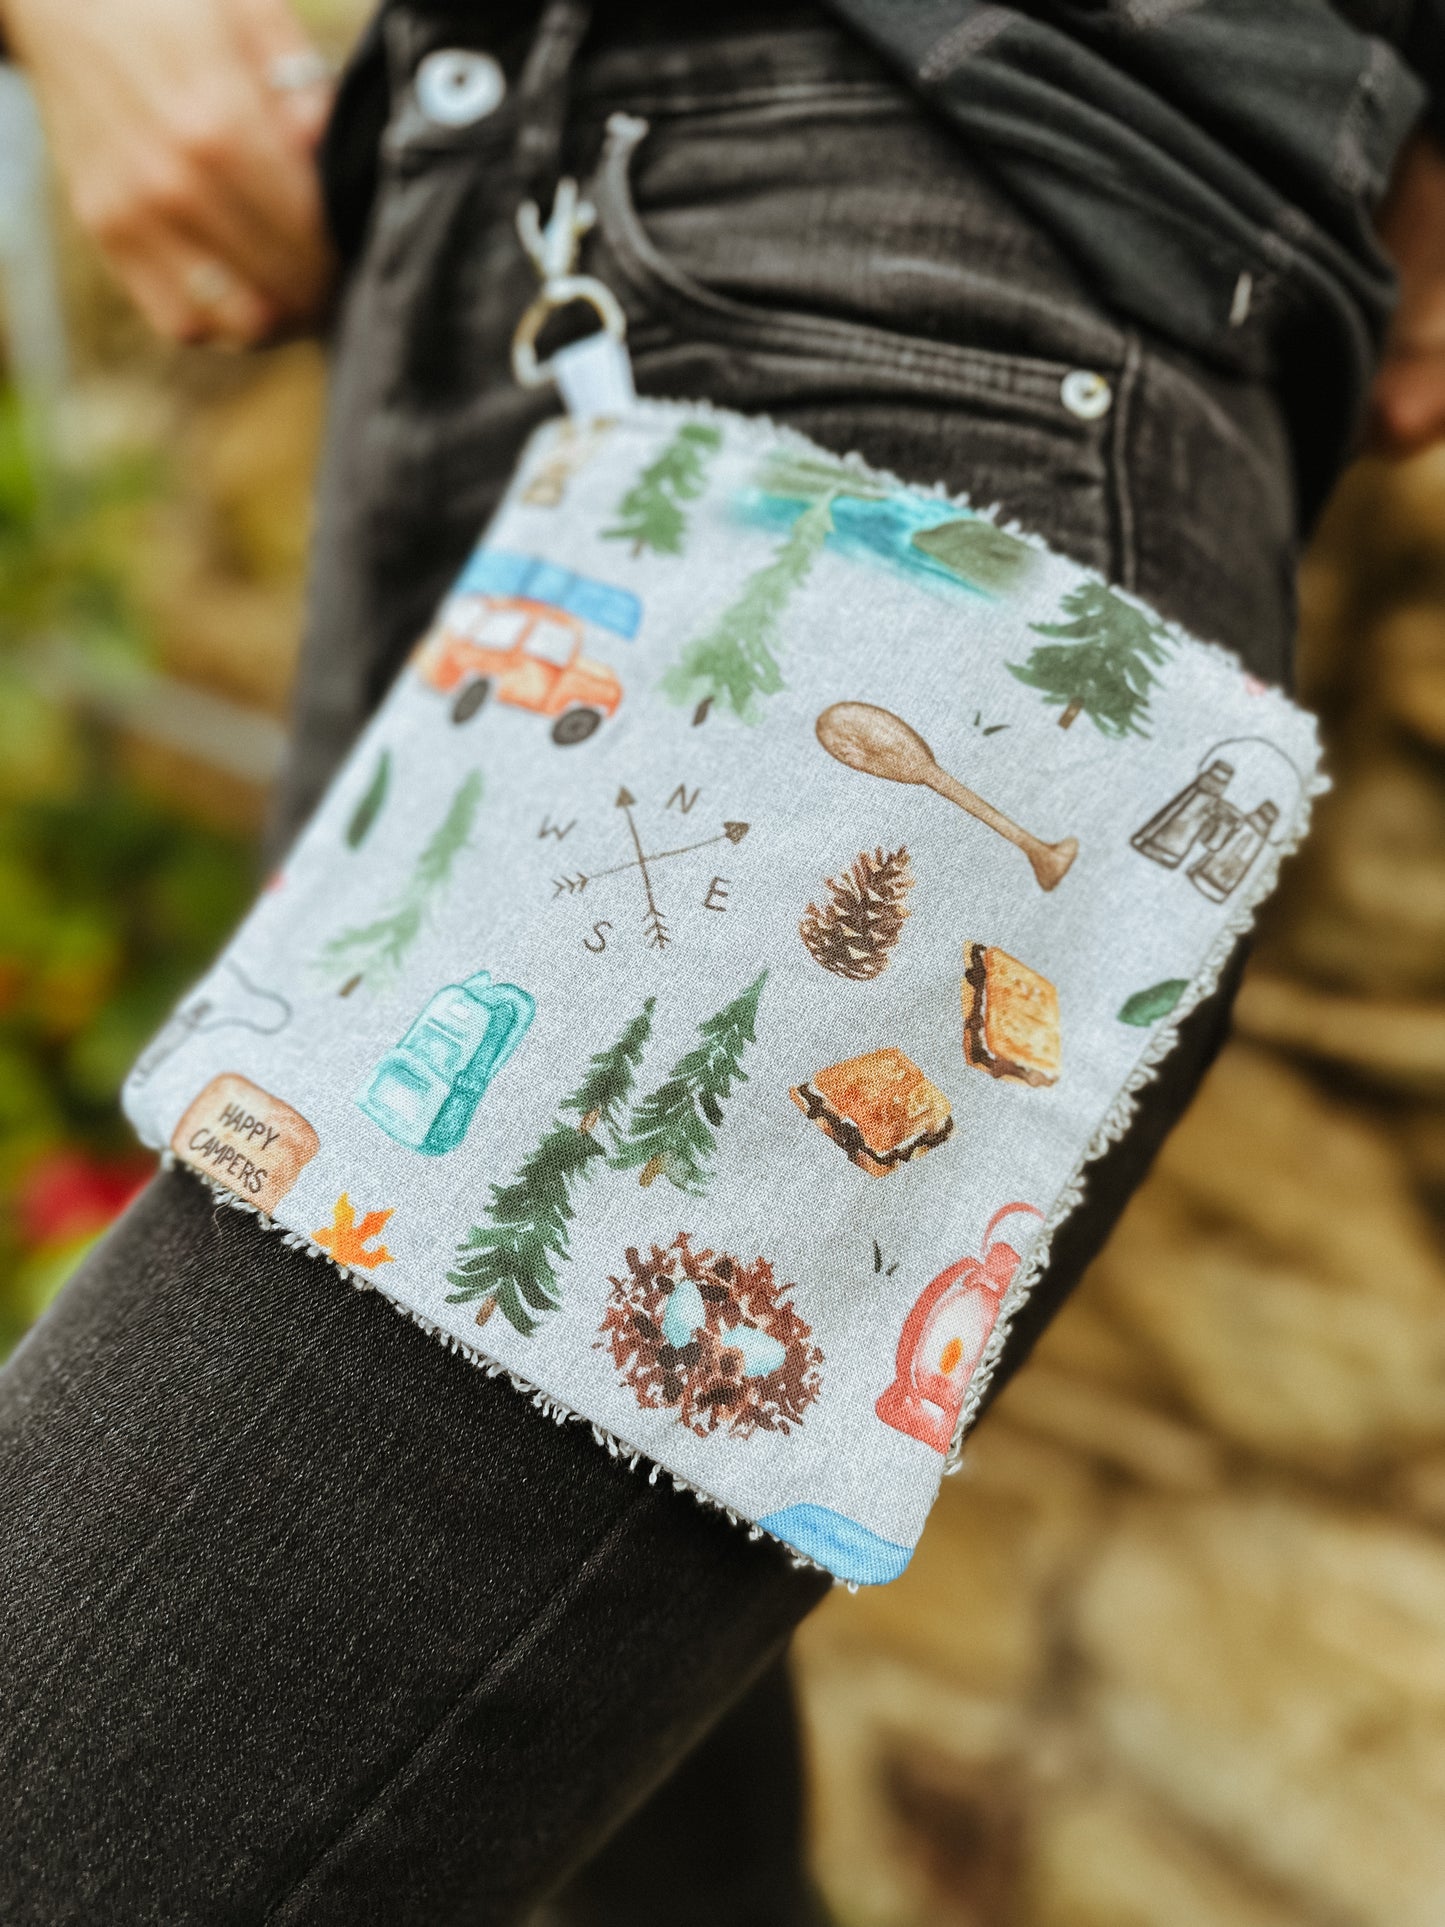 Camping Outdoors Hand Cloth